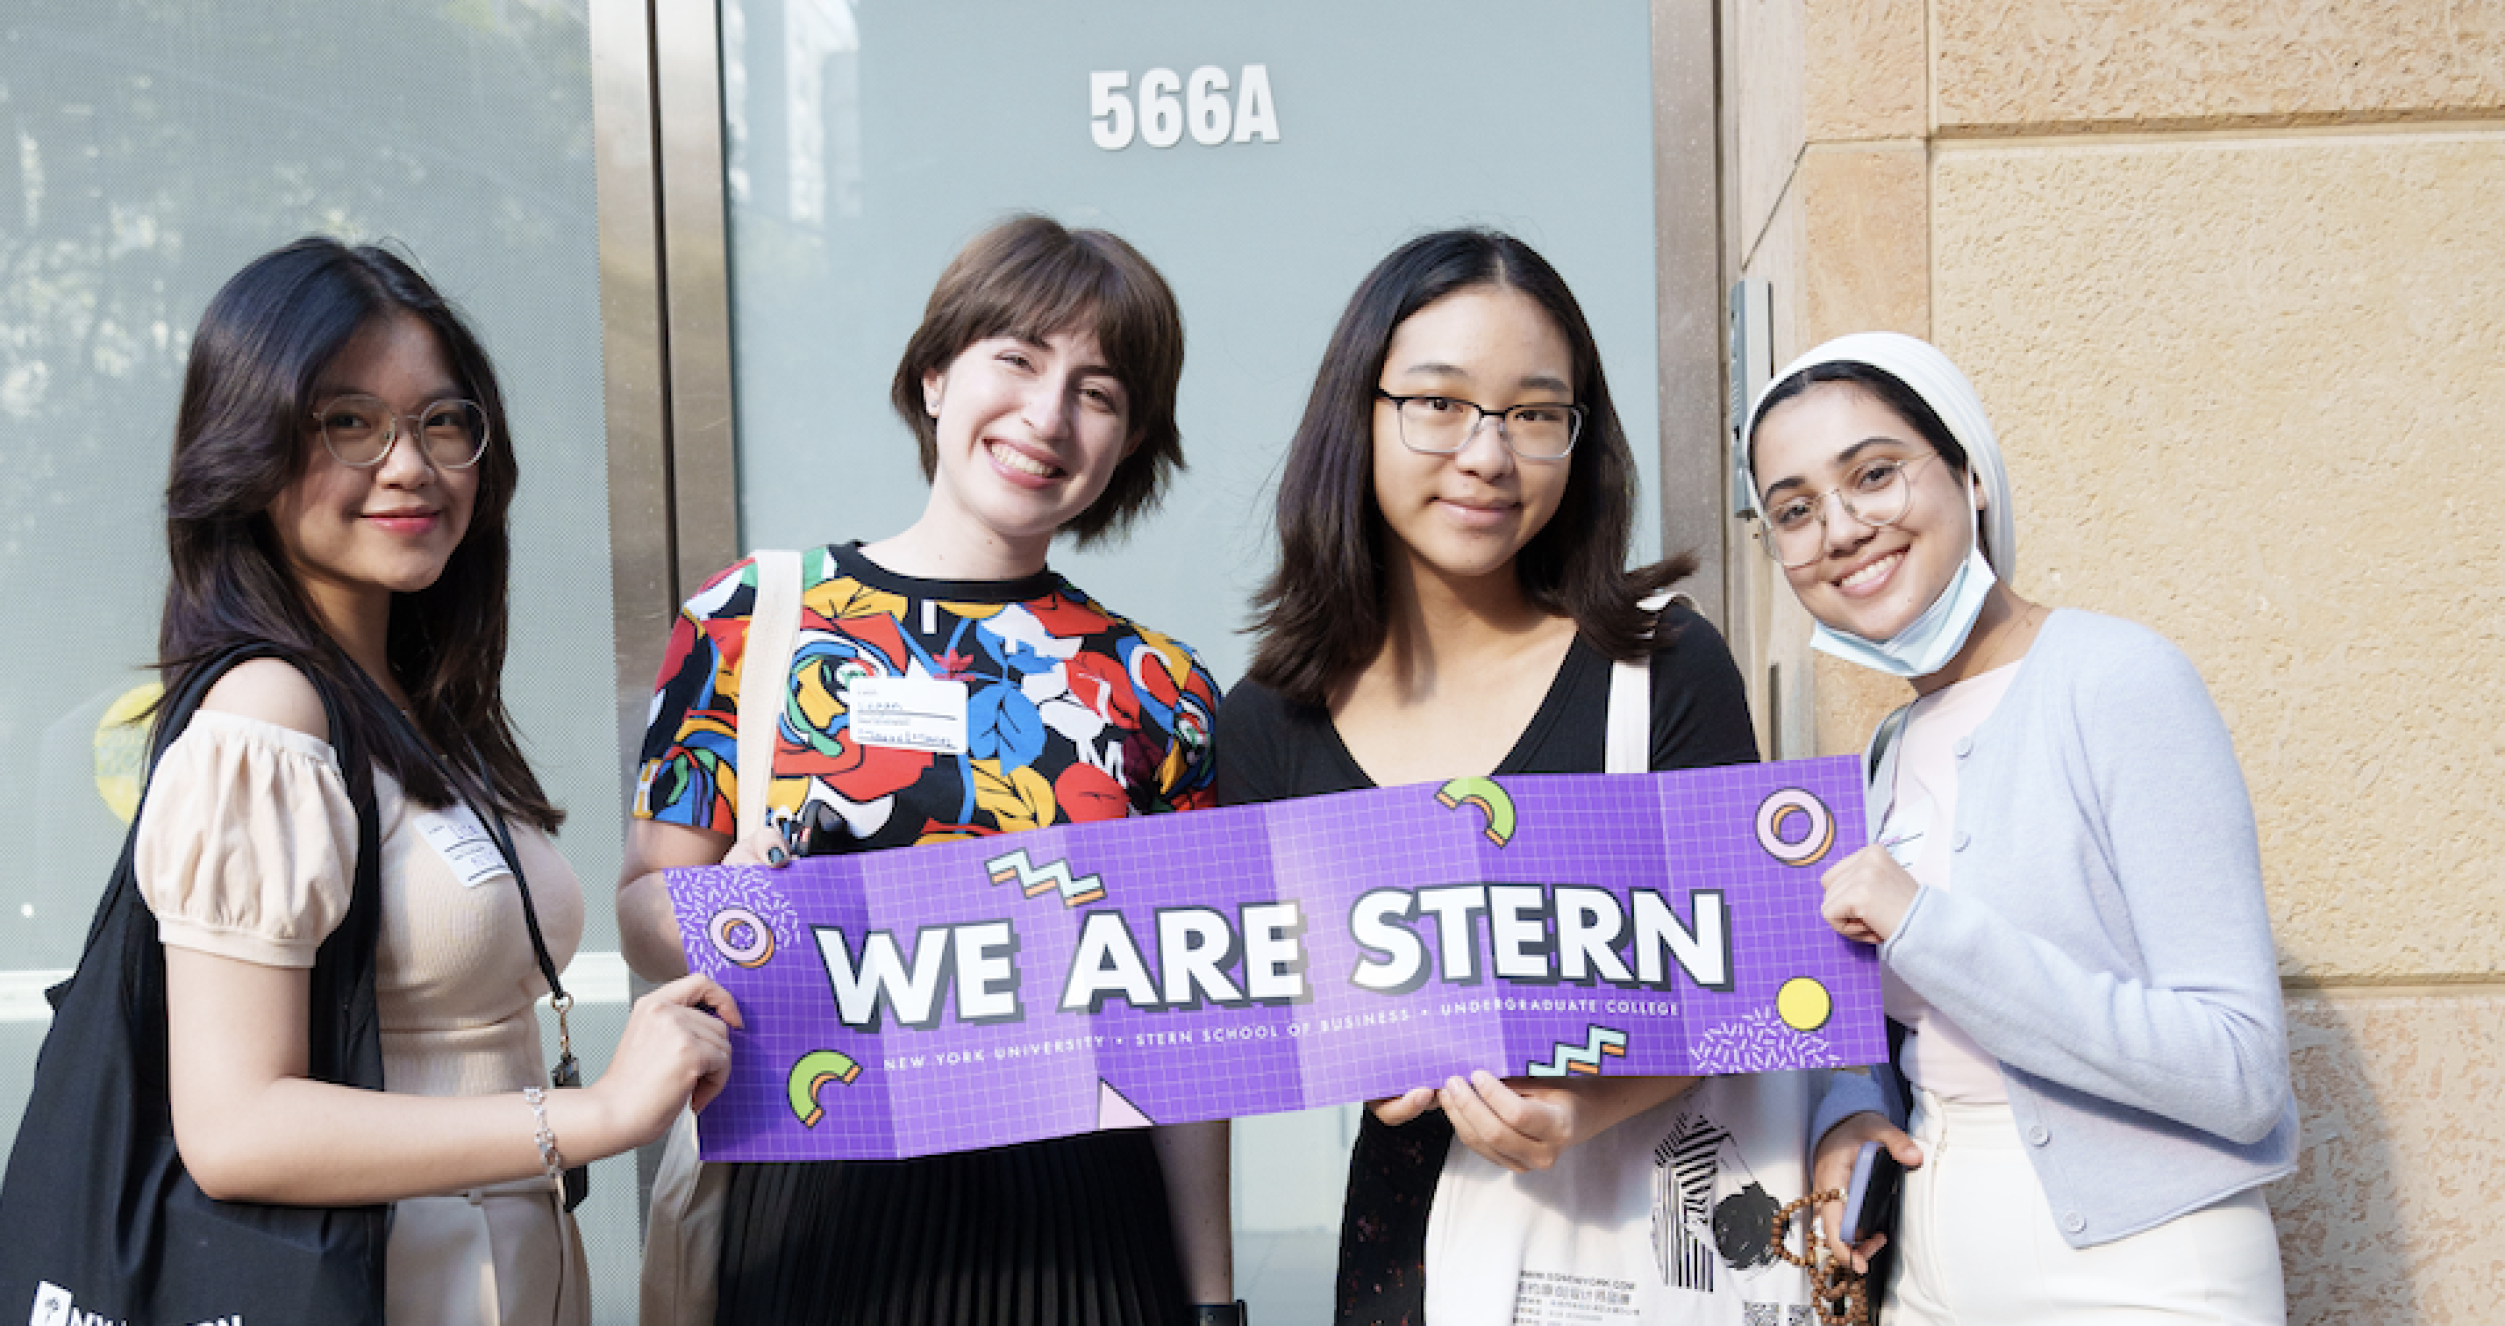 Students holding "We Are Stern" banner